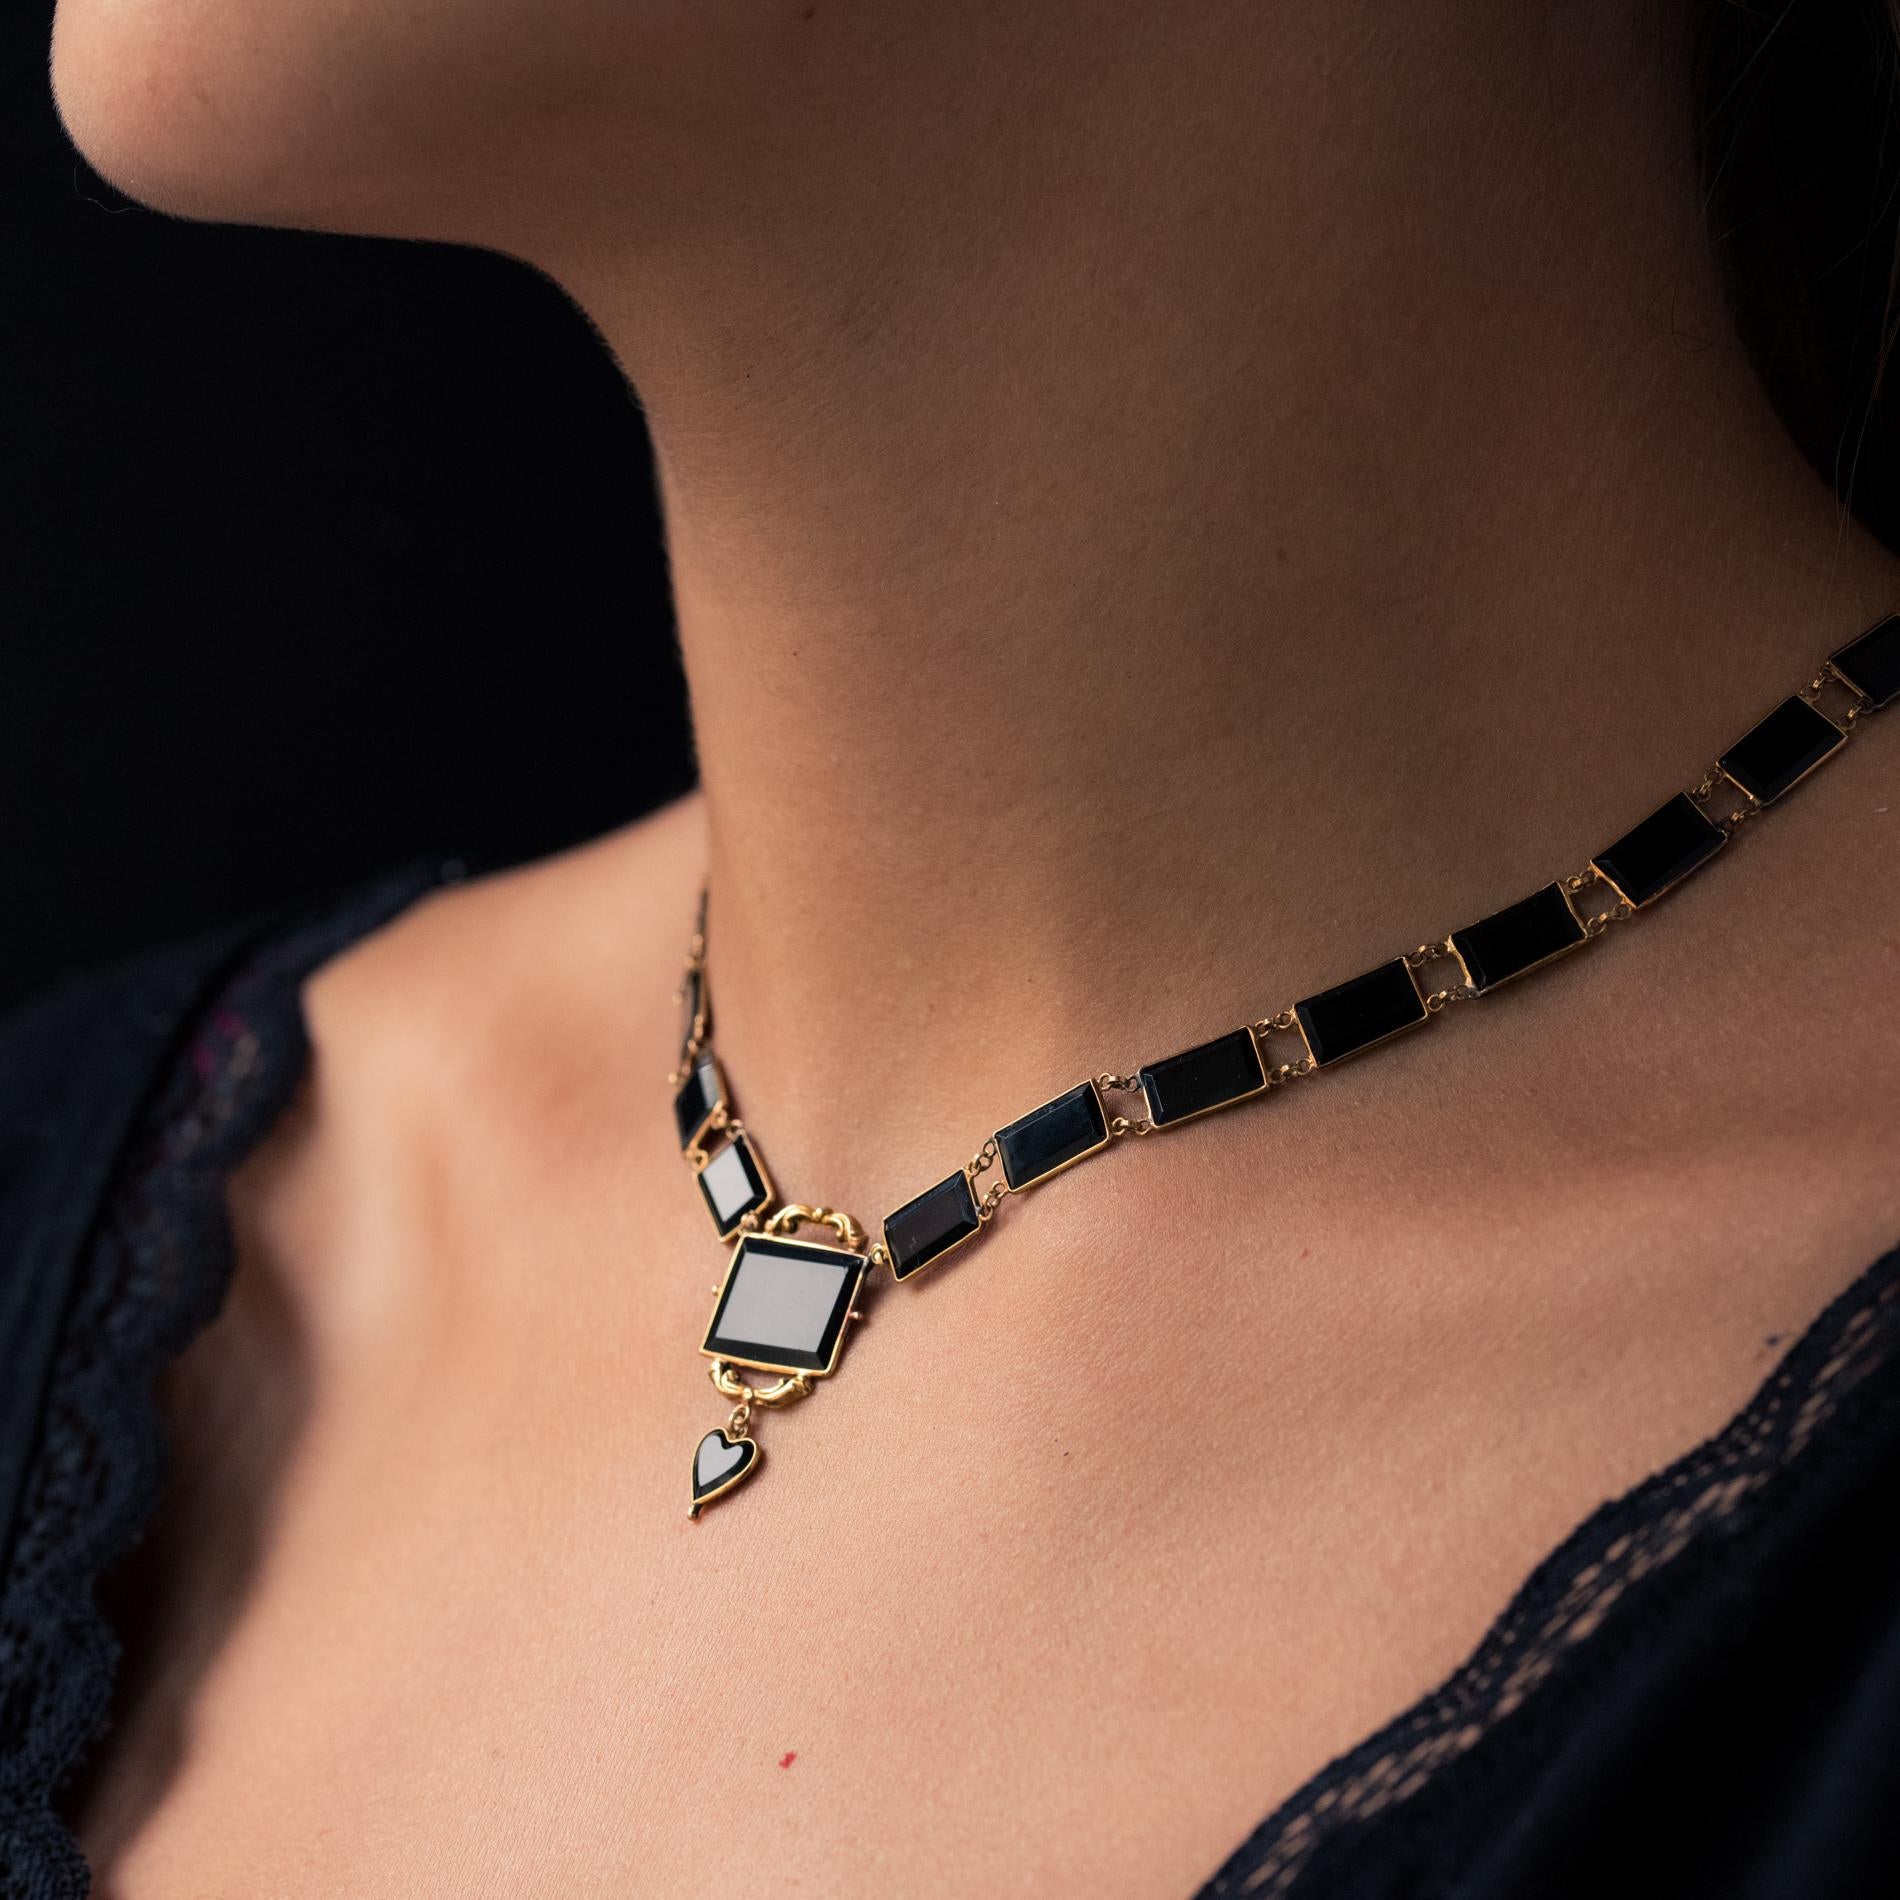 Necklace in 14 karat yellow gold necklace, shell hallmark.
Lovely antique choker necklace, it is made up of thin closed set onyx plates linked together with gold rings. On the front, a larger onyx is bordered with scroll patterns and supports in a